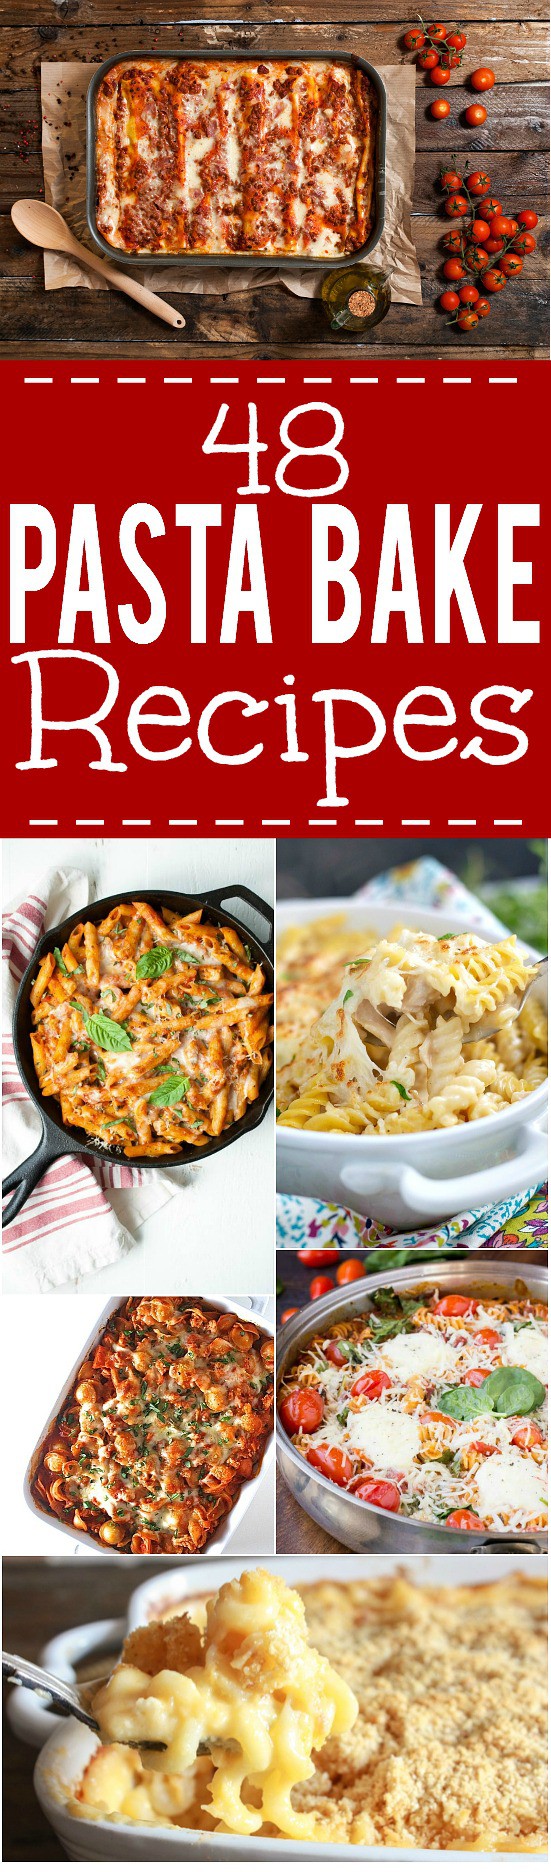 48 Pasta Bake Recipes - Make these simple, cheesy, saucy Pasta Bake Recipes for a quick and easy, crowd-pleasing dinner. With 48 of the BEST baked pasta dishes to choose from, you'll definitely find one you love! Perfect for easy family dinner!